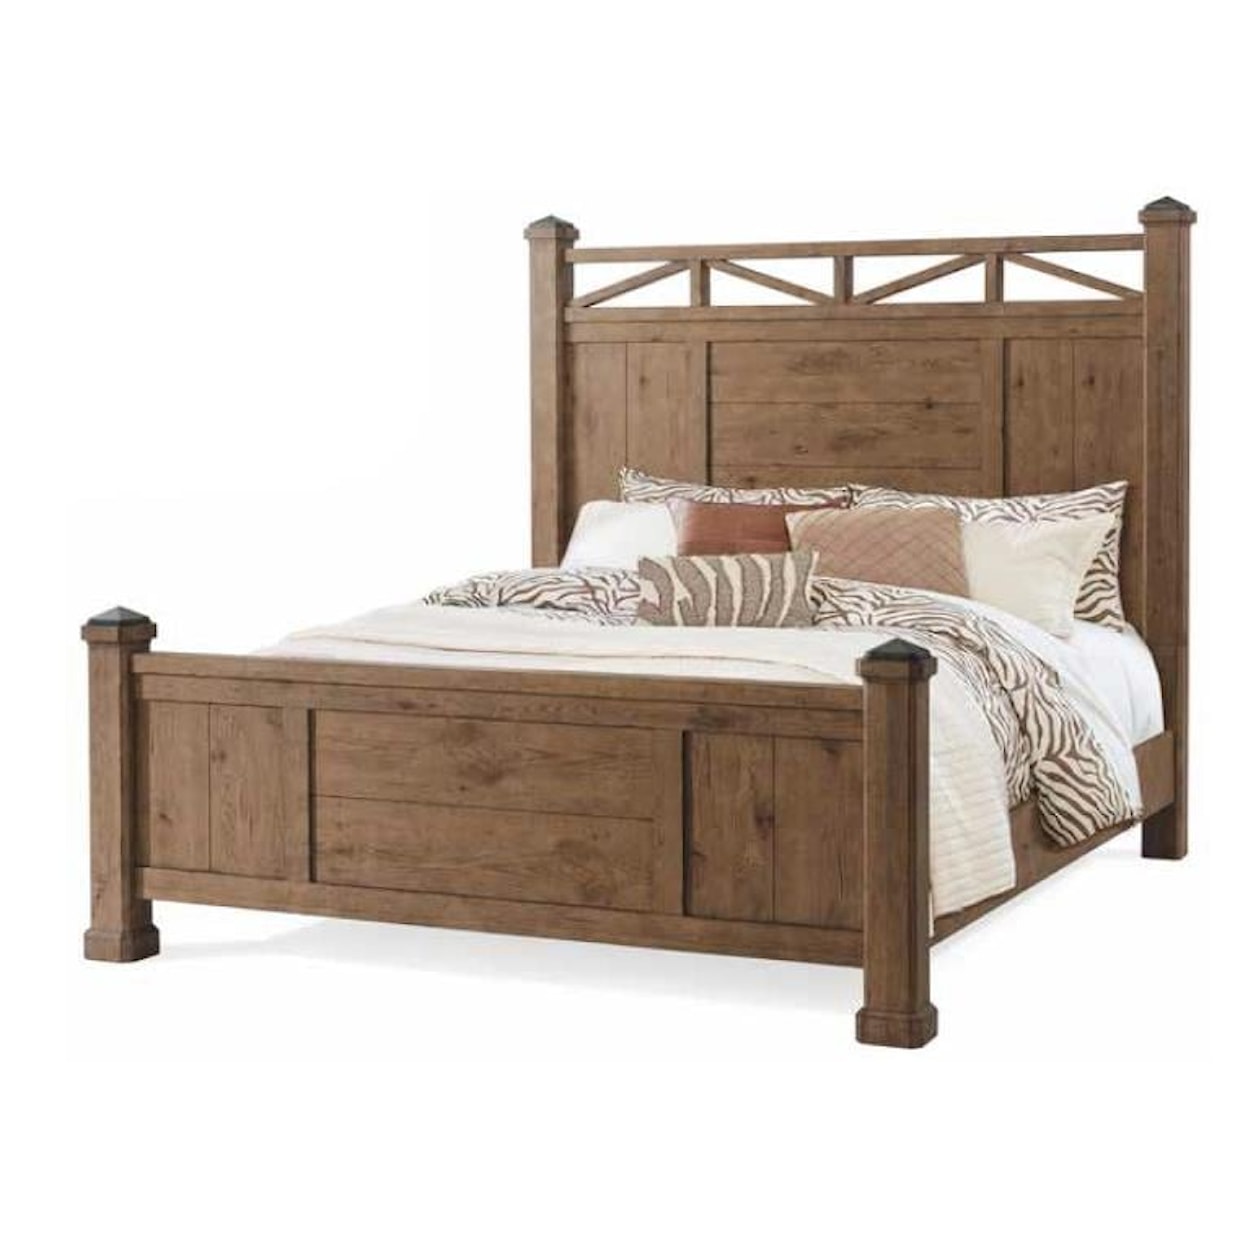 Trisha Yearwood Home Collection by Legacy Classic Coming Home Queen Poster Bed